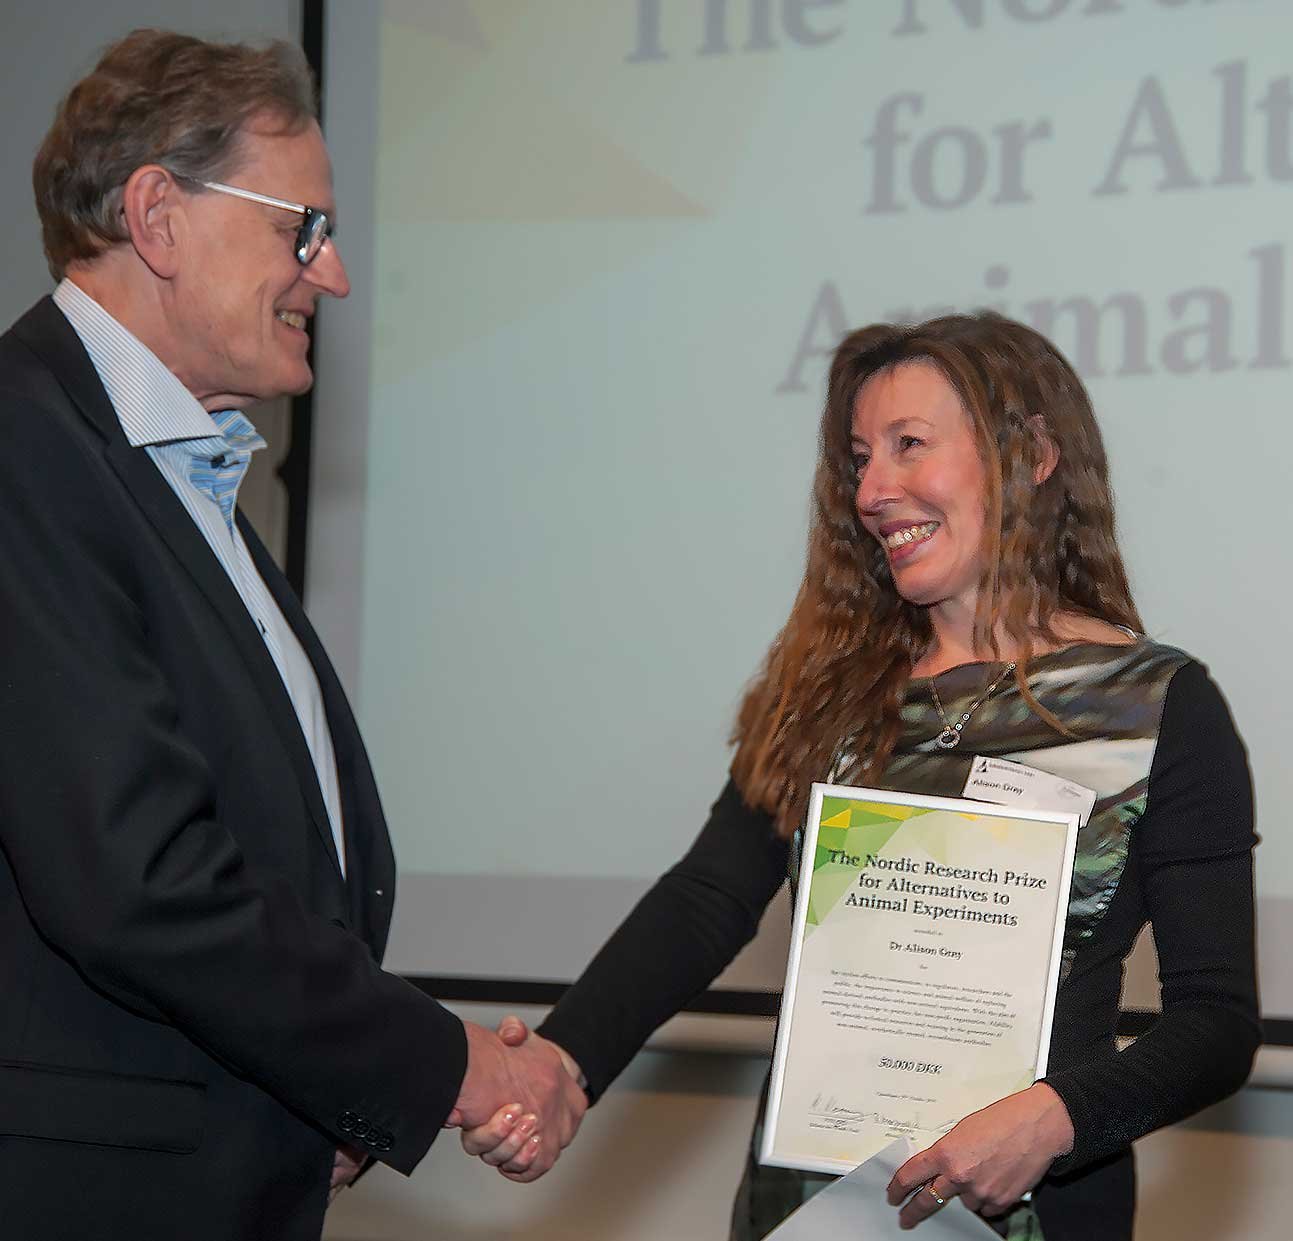 Alison-Gray-Afability-Nordic-Prize-for-Alternatives-to-Animal-Experiments